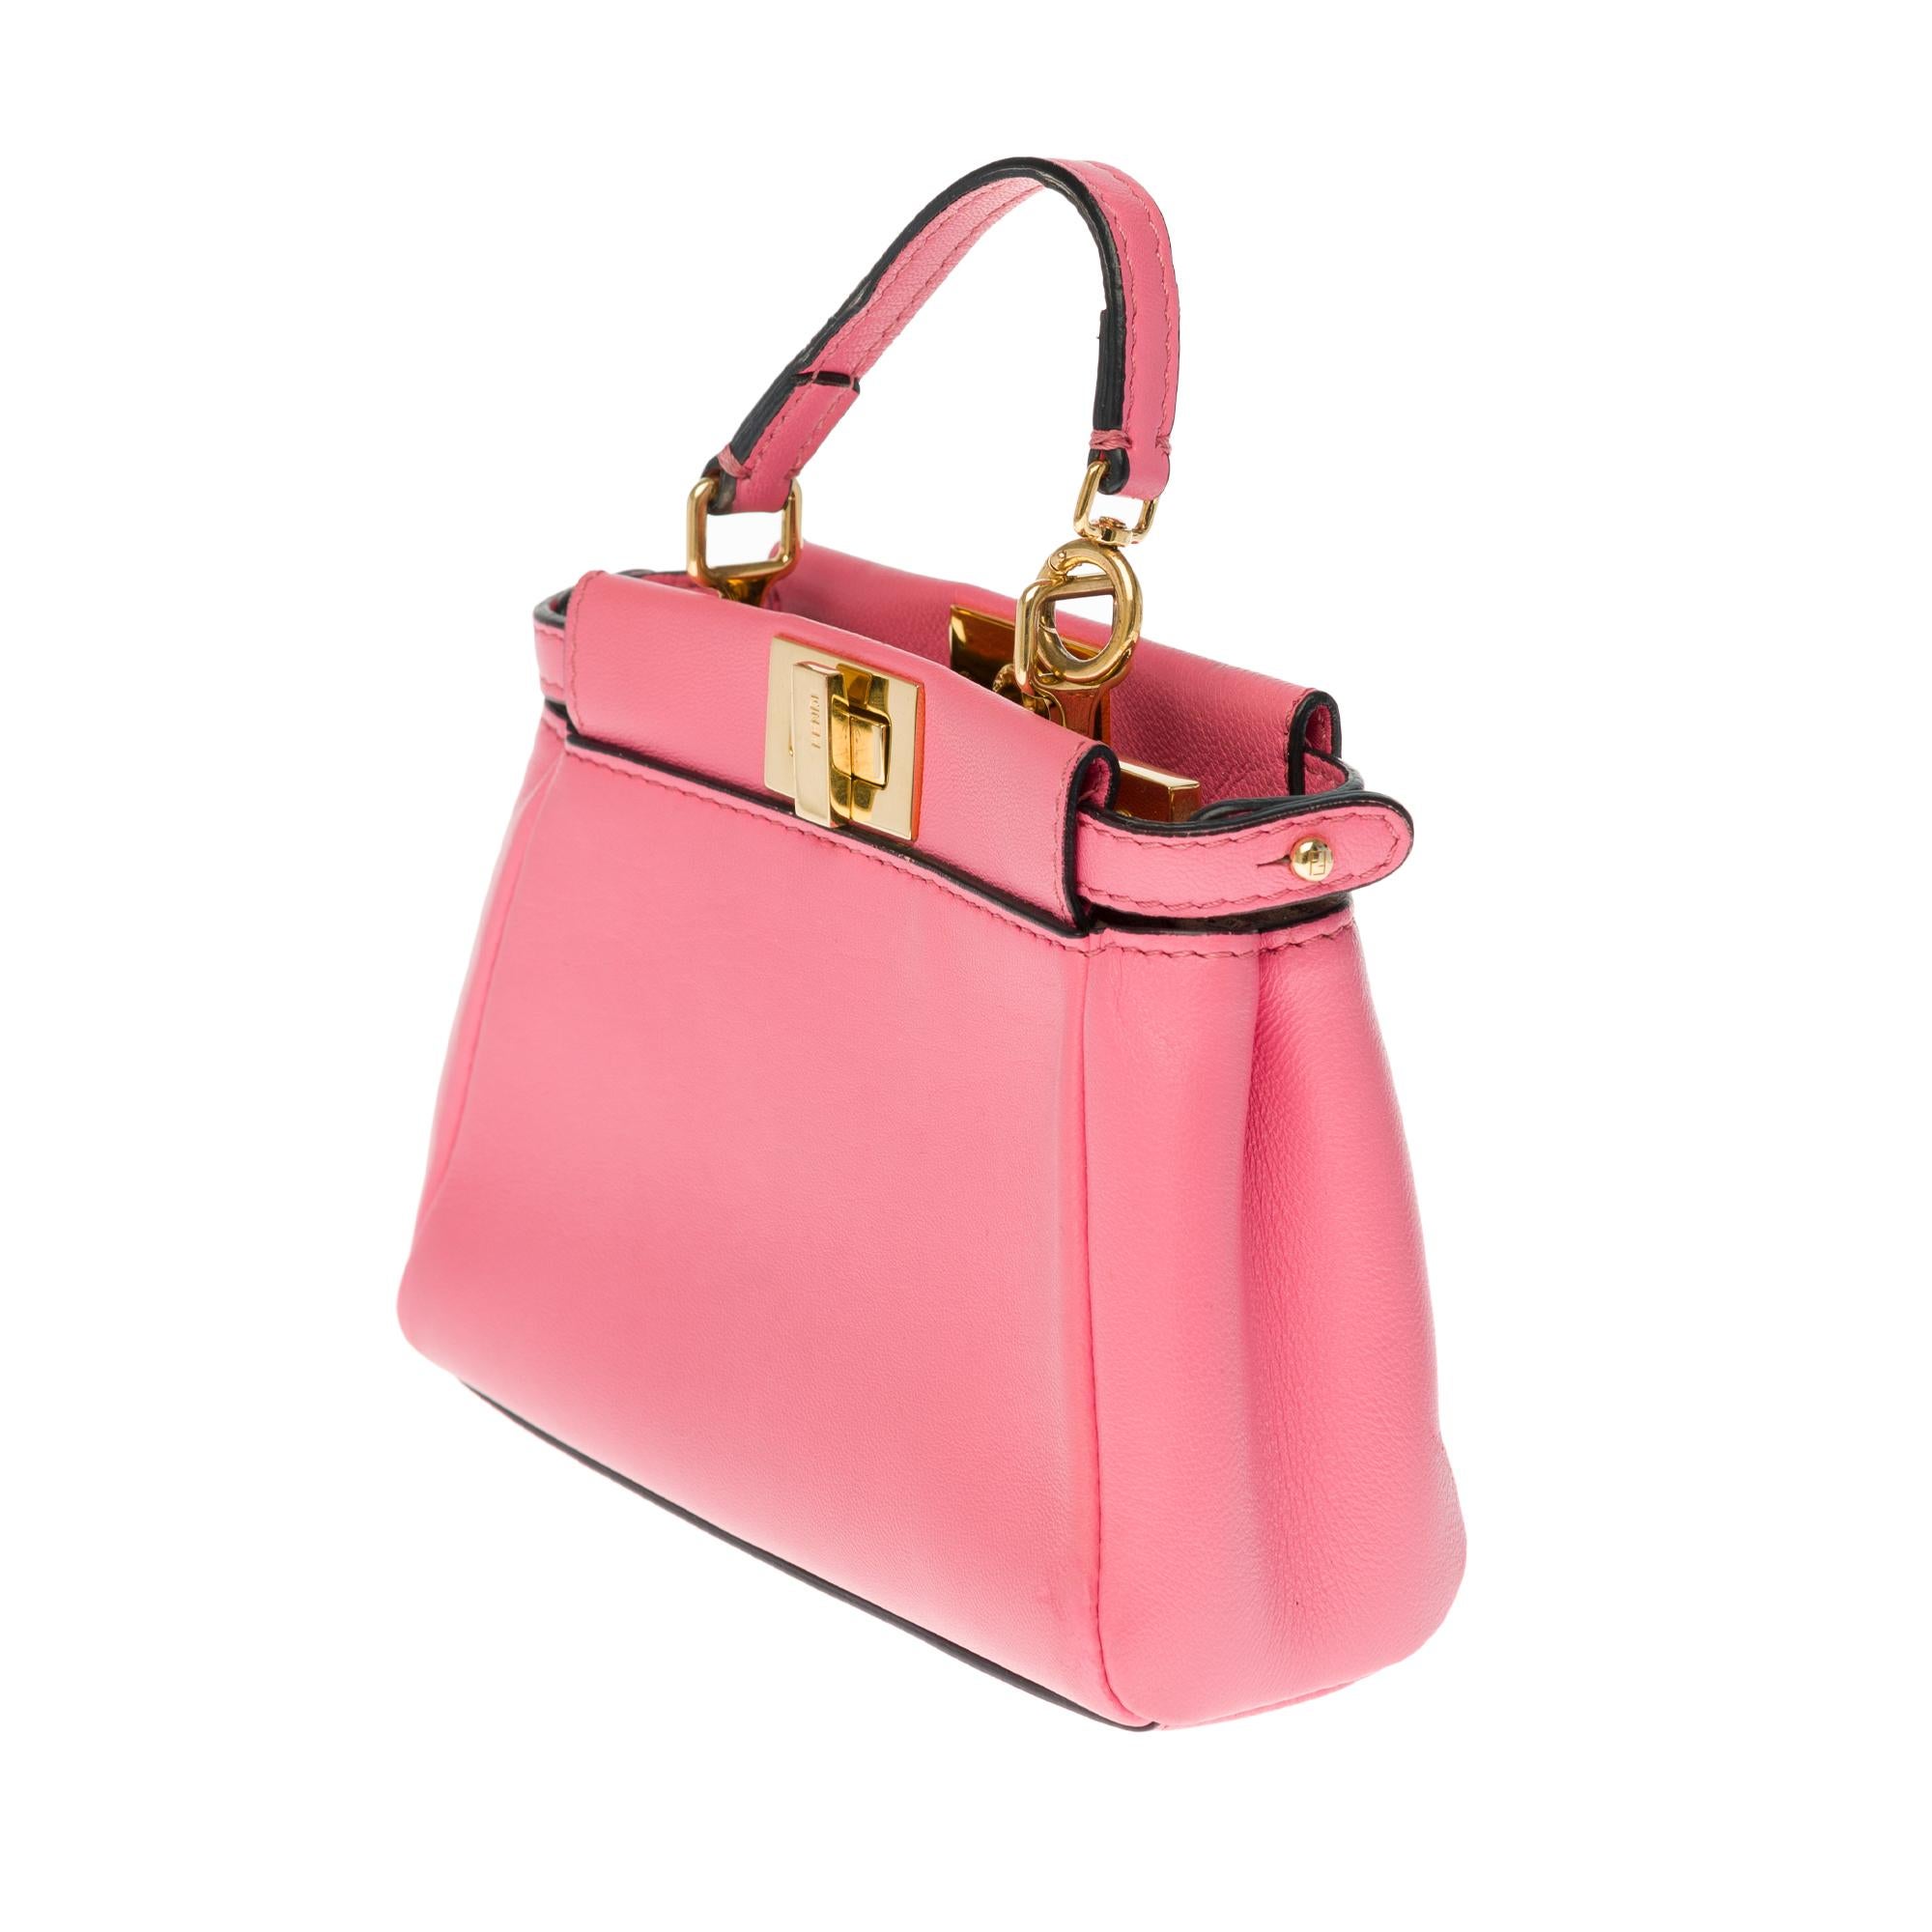 Pink Amazing Fendi Micro Peekaboo shoulder bag in pink leather and gold hardware 